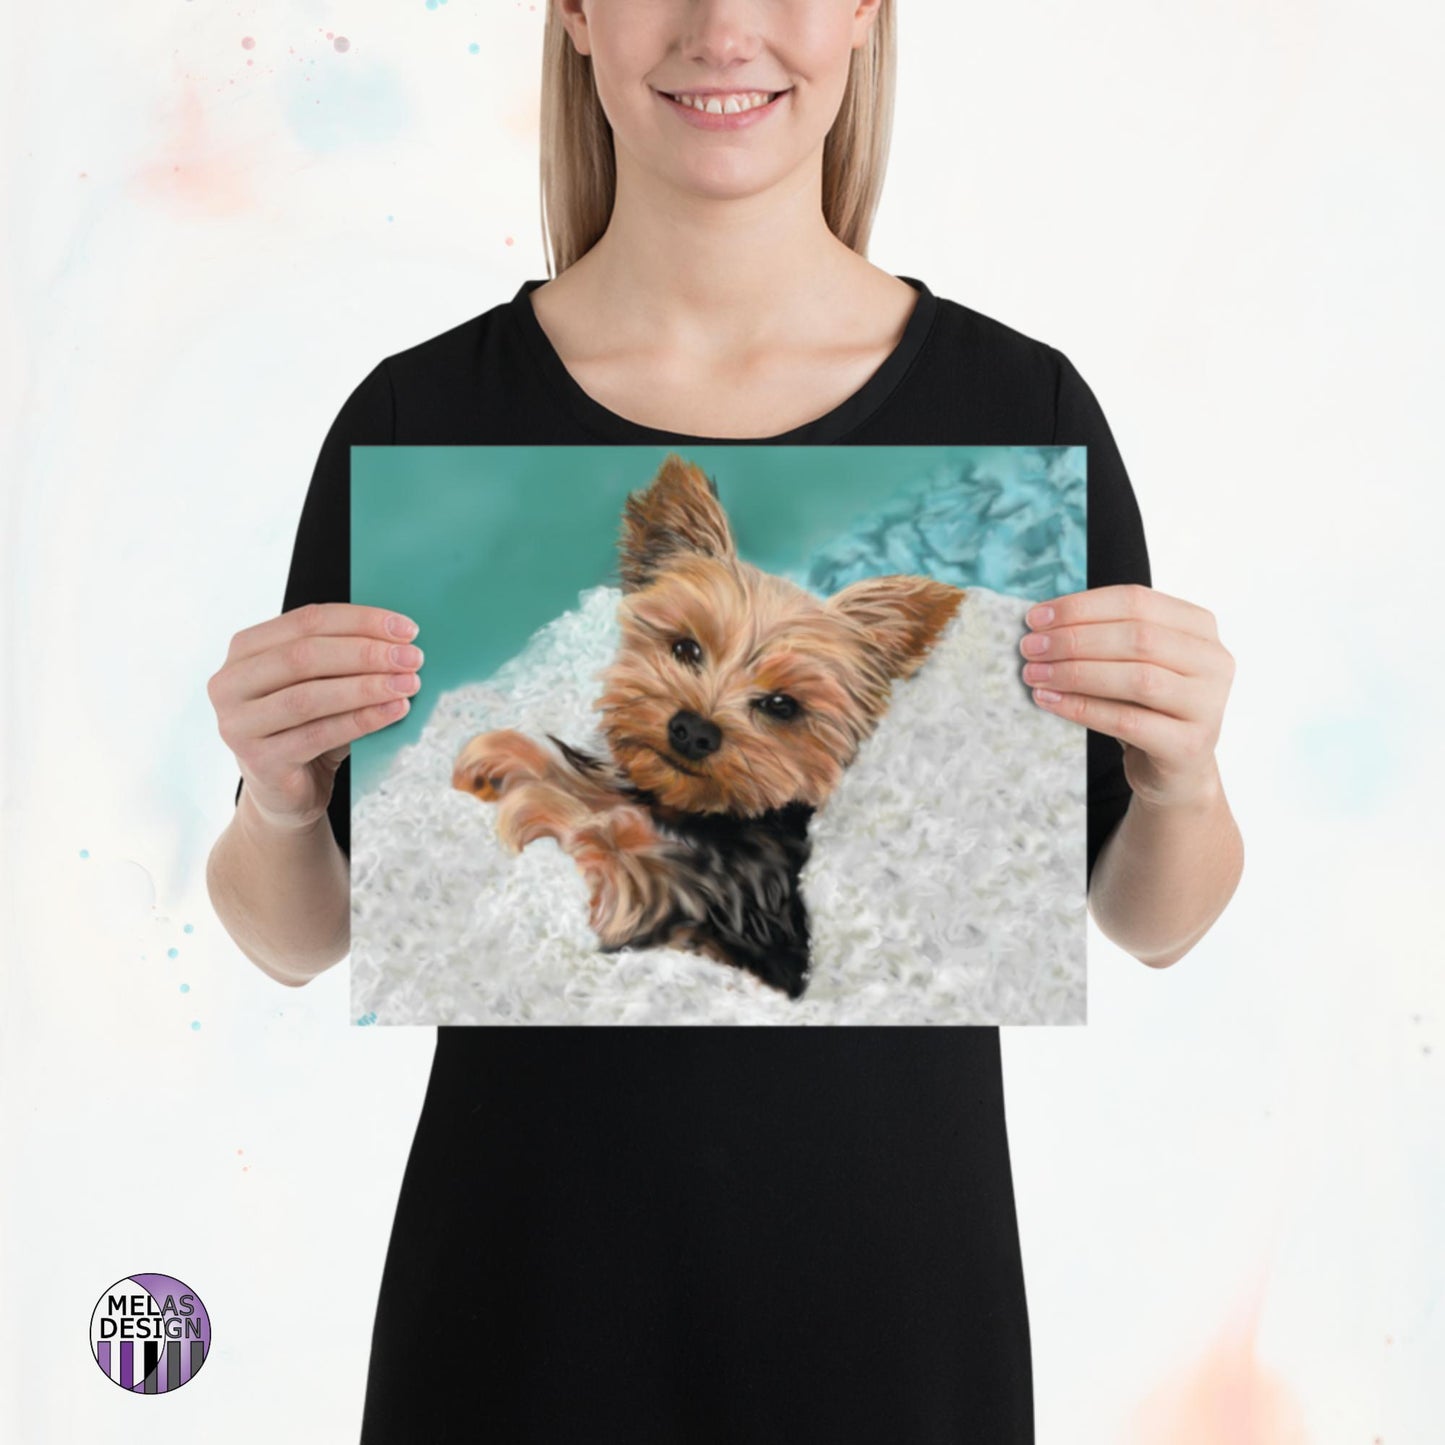 Chewie the Adorable Yorkie Art Print Drawing